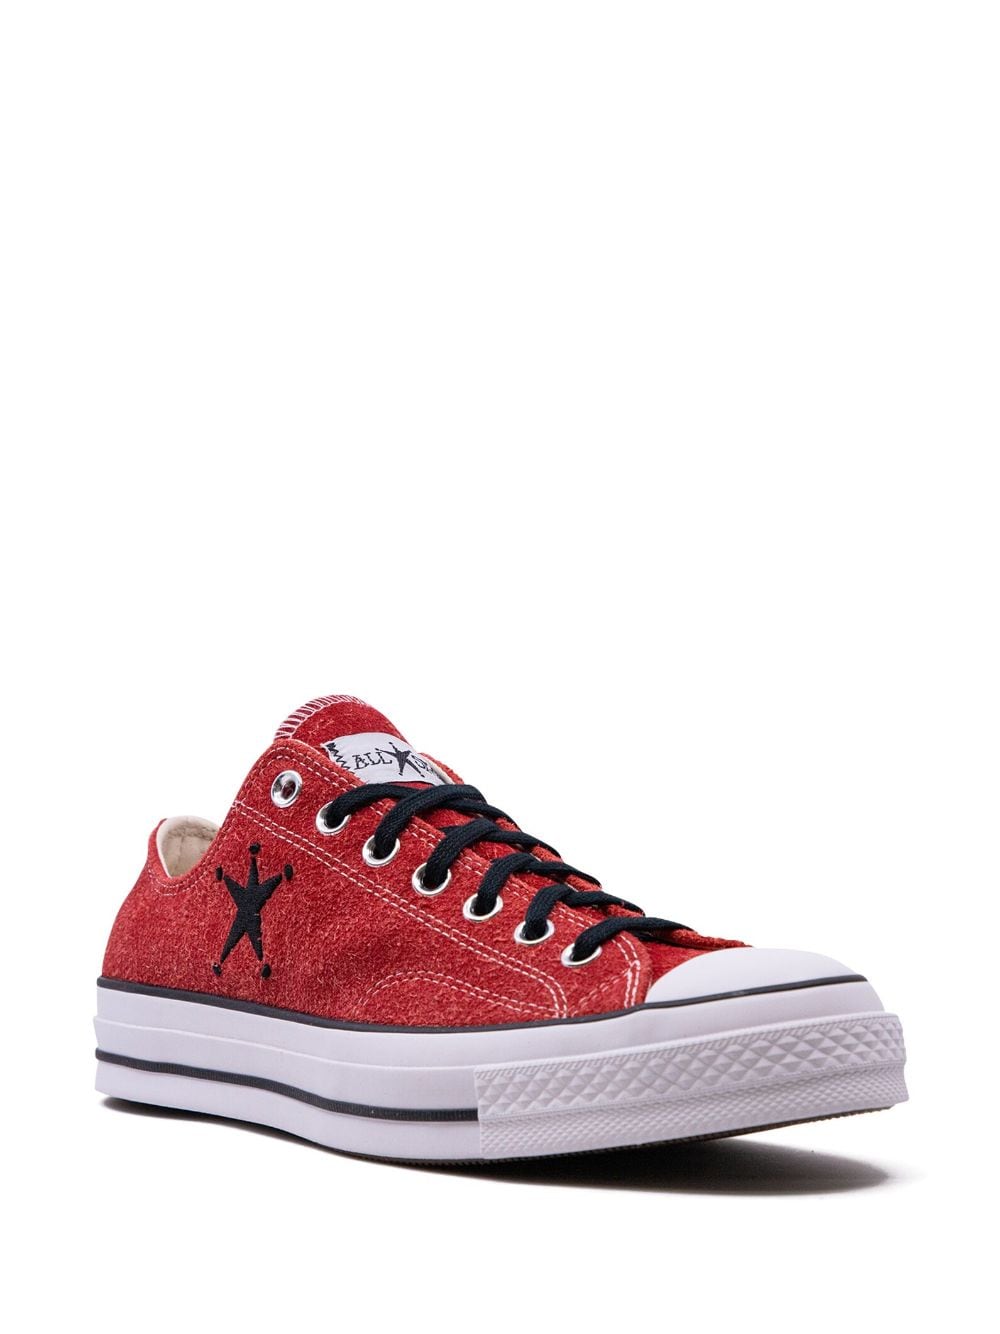 Shop Converse X Stussy Chuck 70 "poppy Red" Sneakers